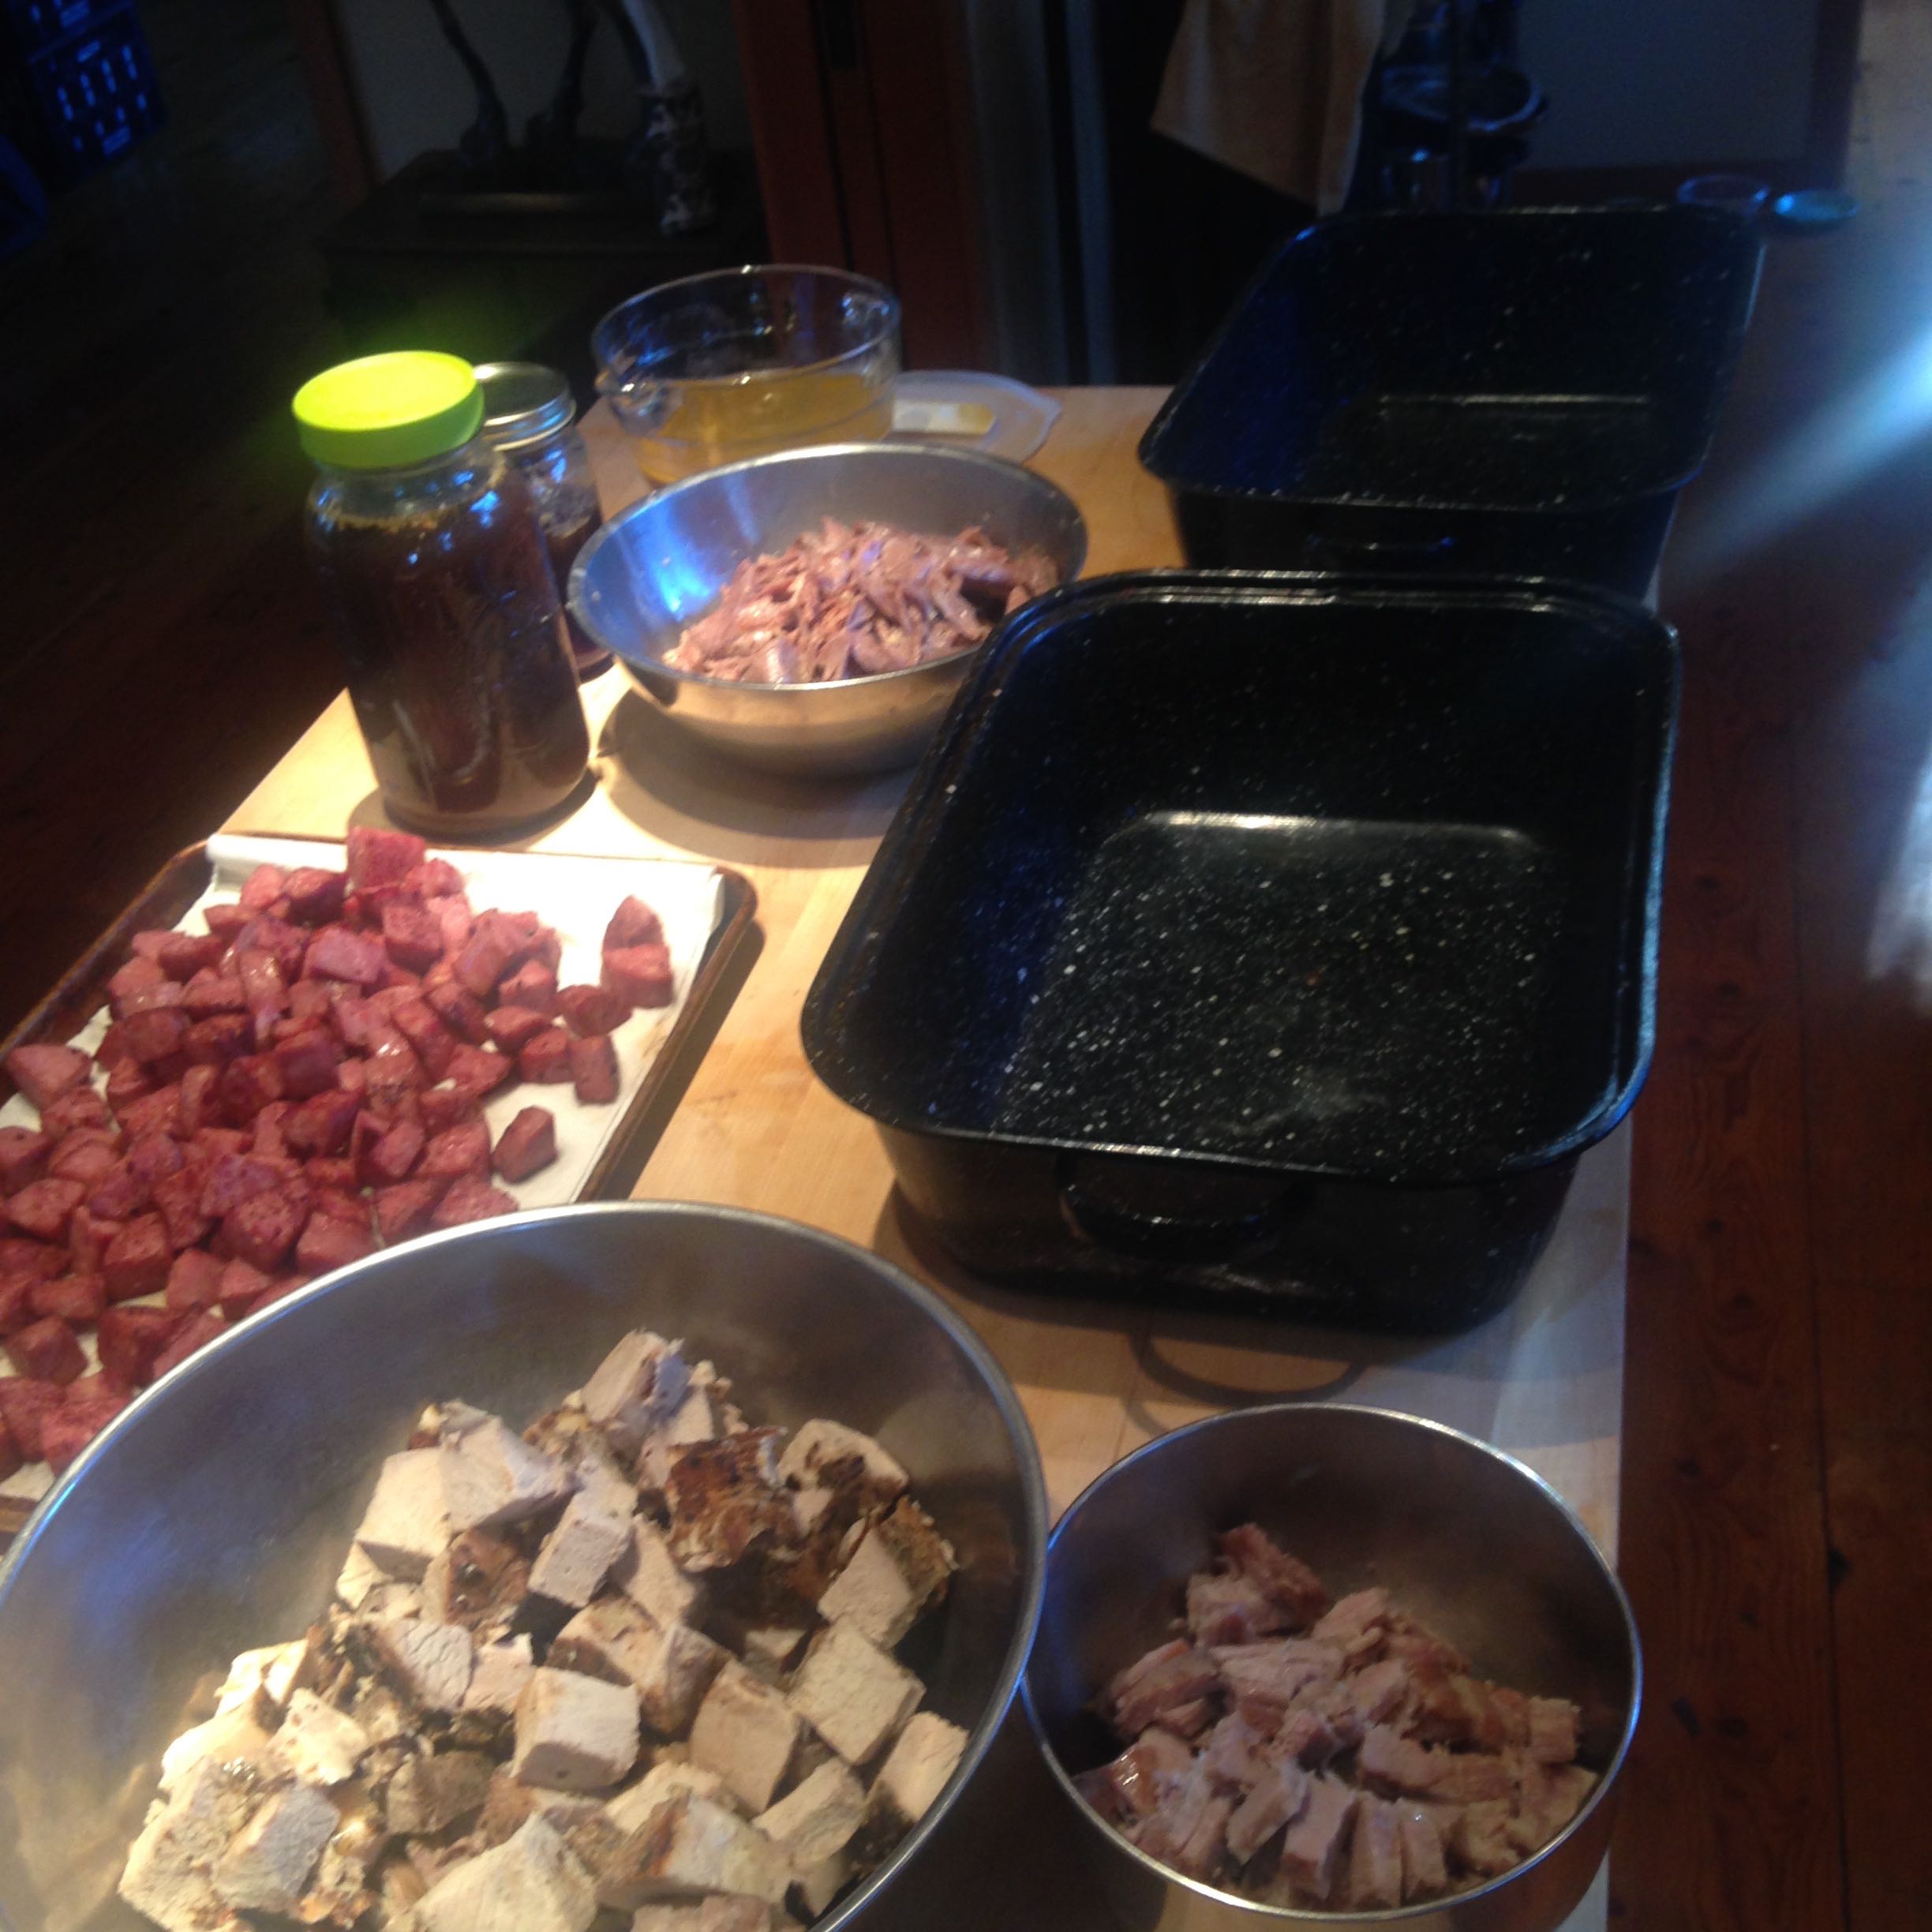 Here you see everything ready to put together, except the beans. They are on the stove. The duck, pork, sausage, juice from the duck and pork,  salt pork are ready to be layered together.